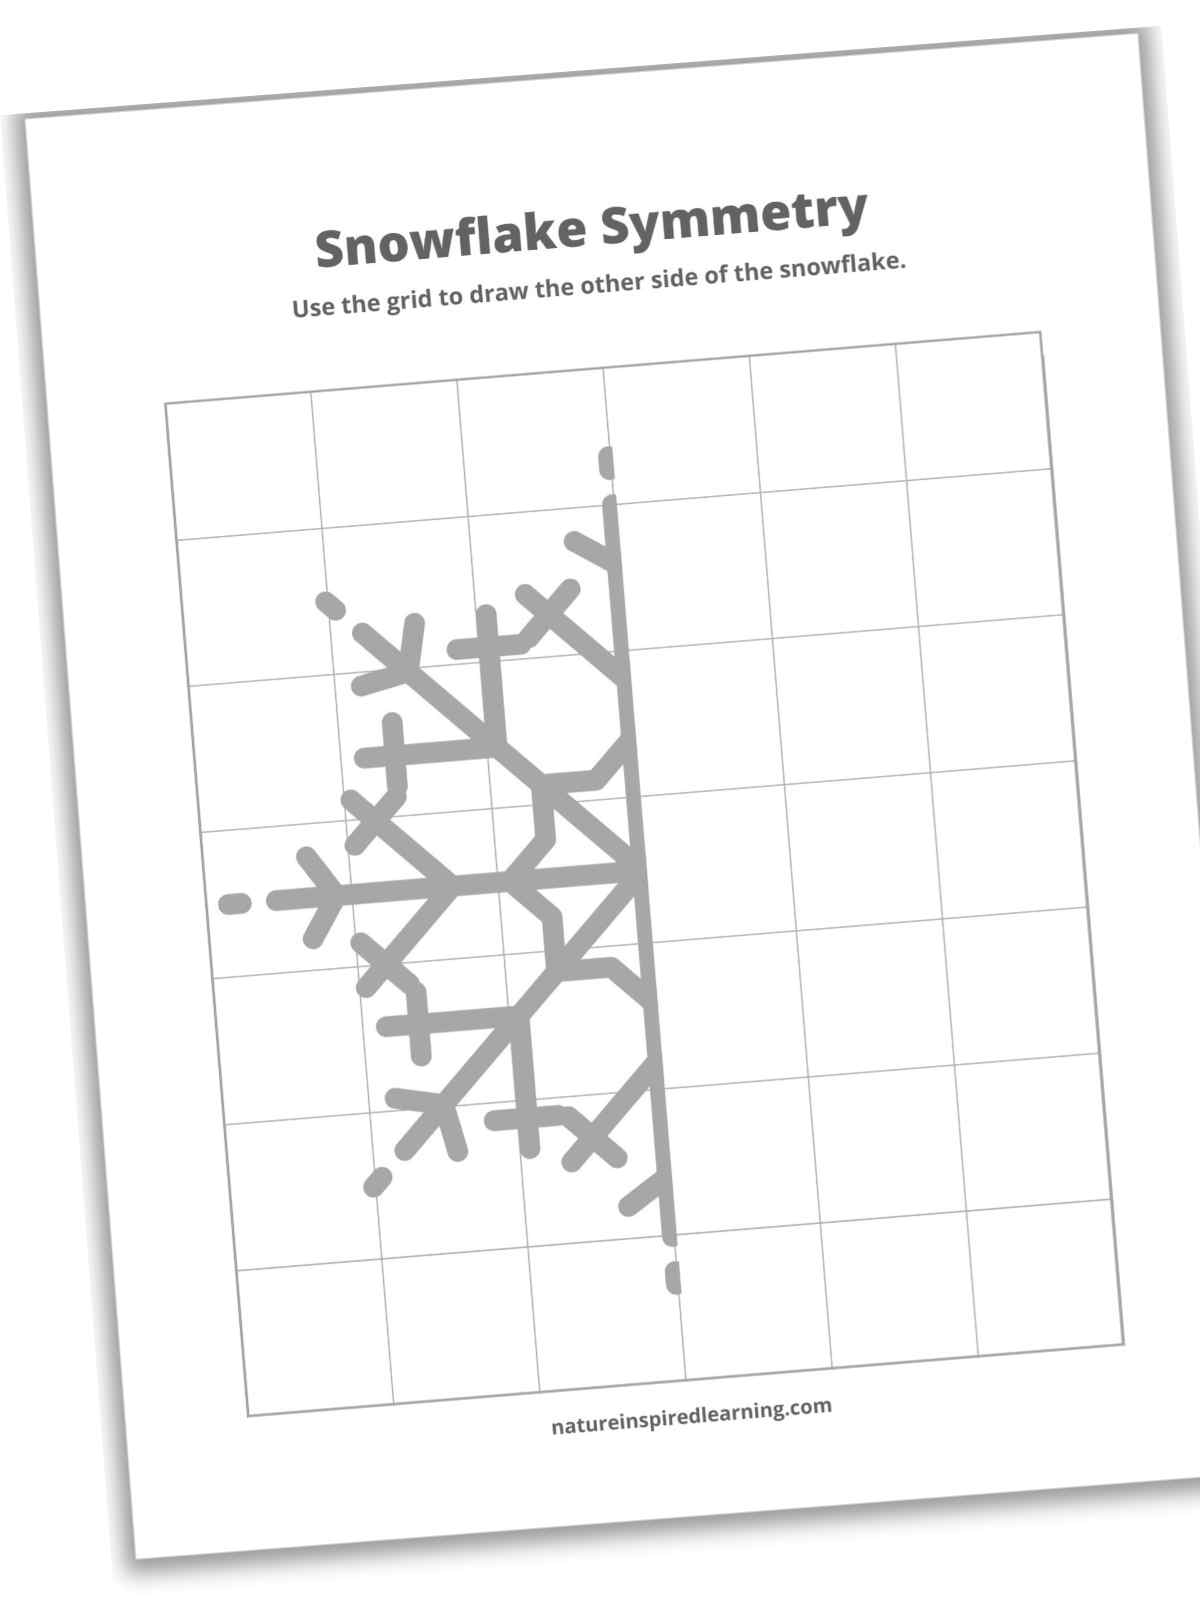 printable slanted with half of a snowflake design on grid paper in black and white